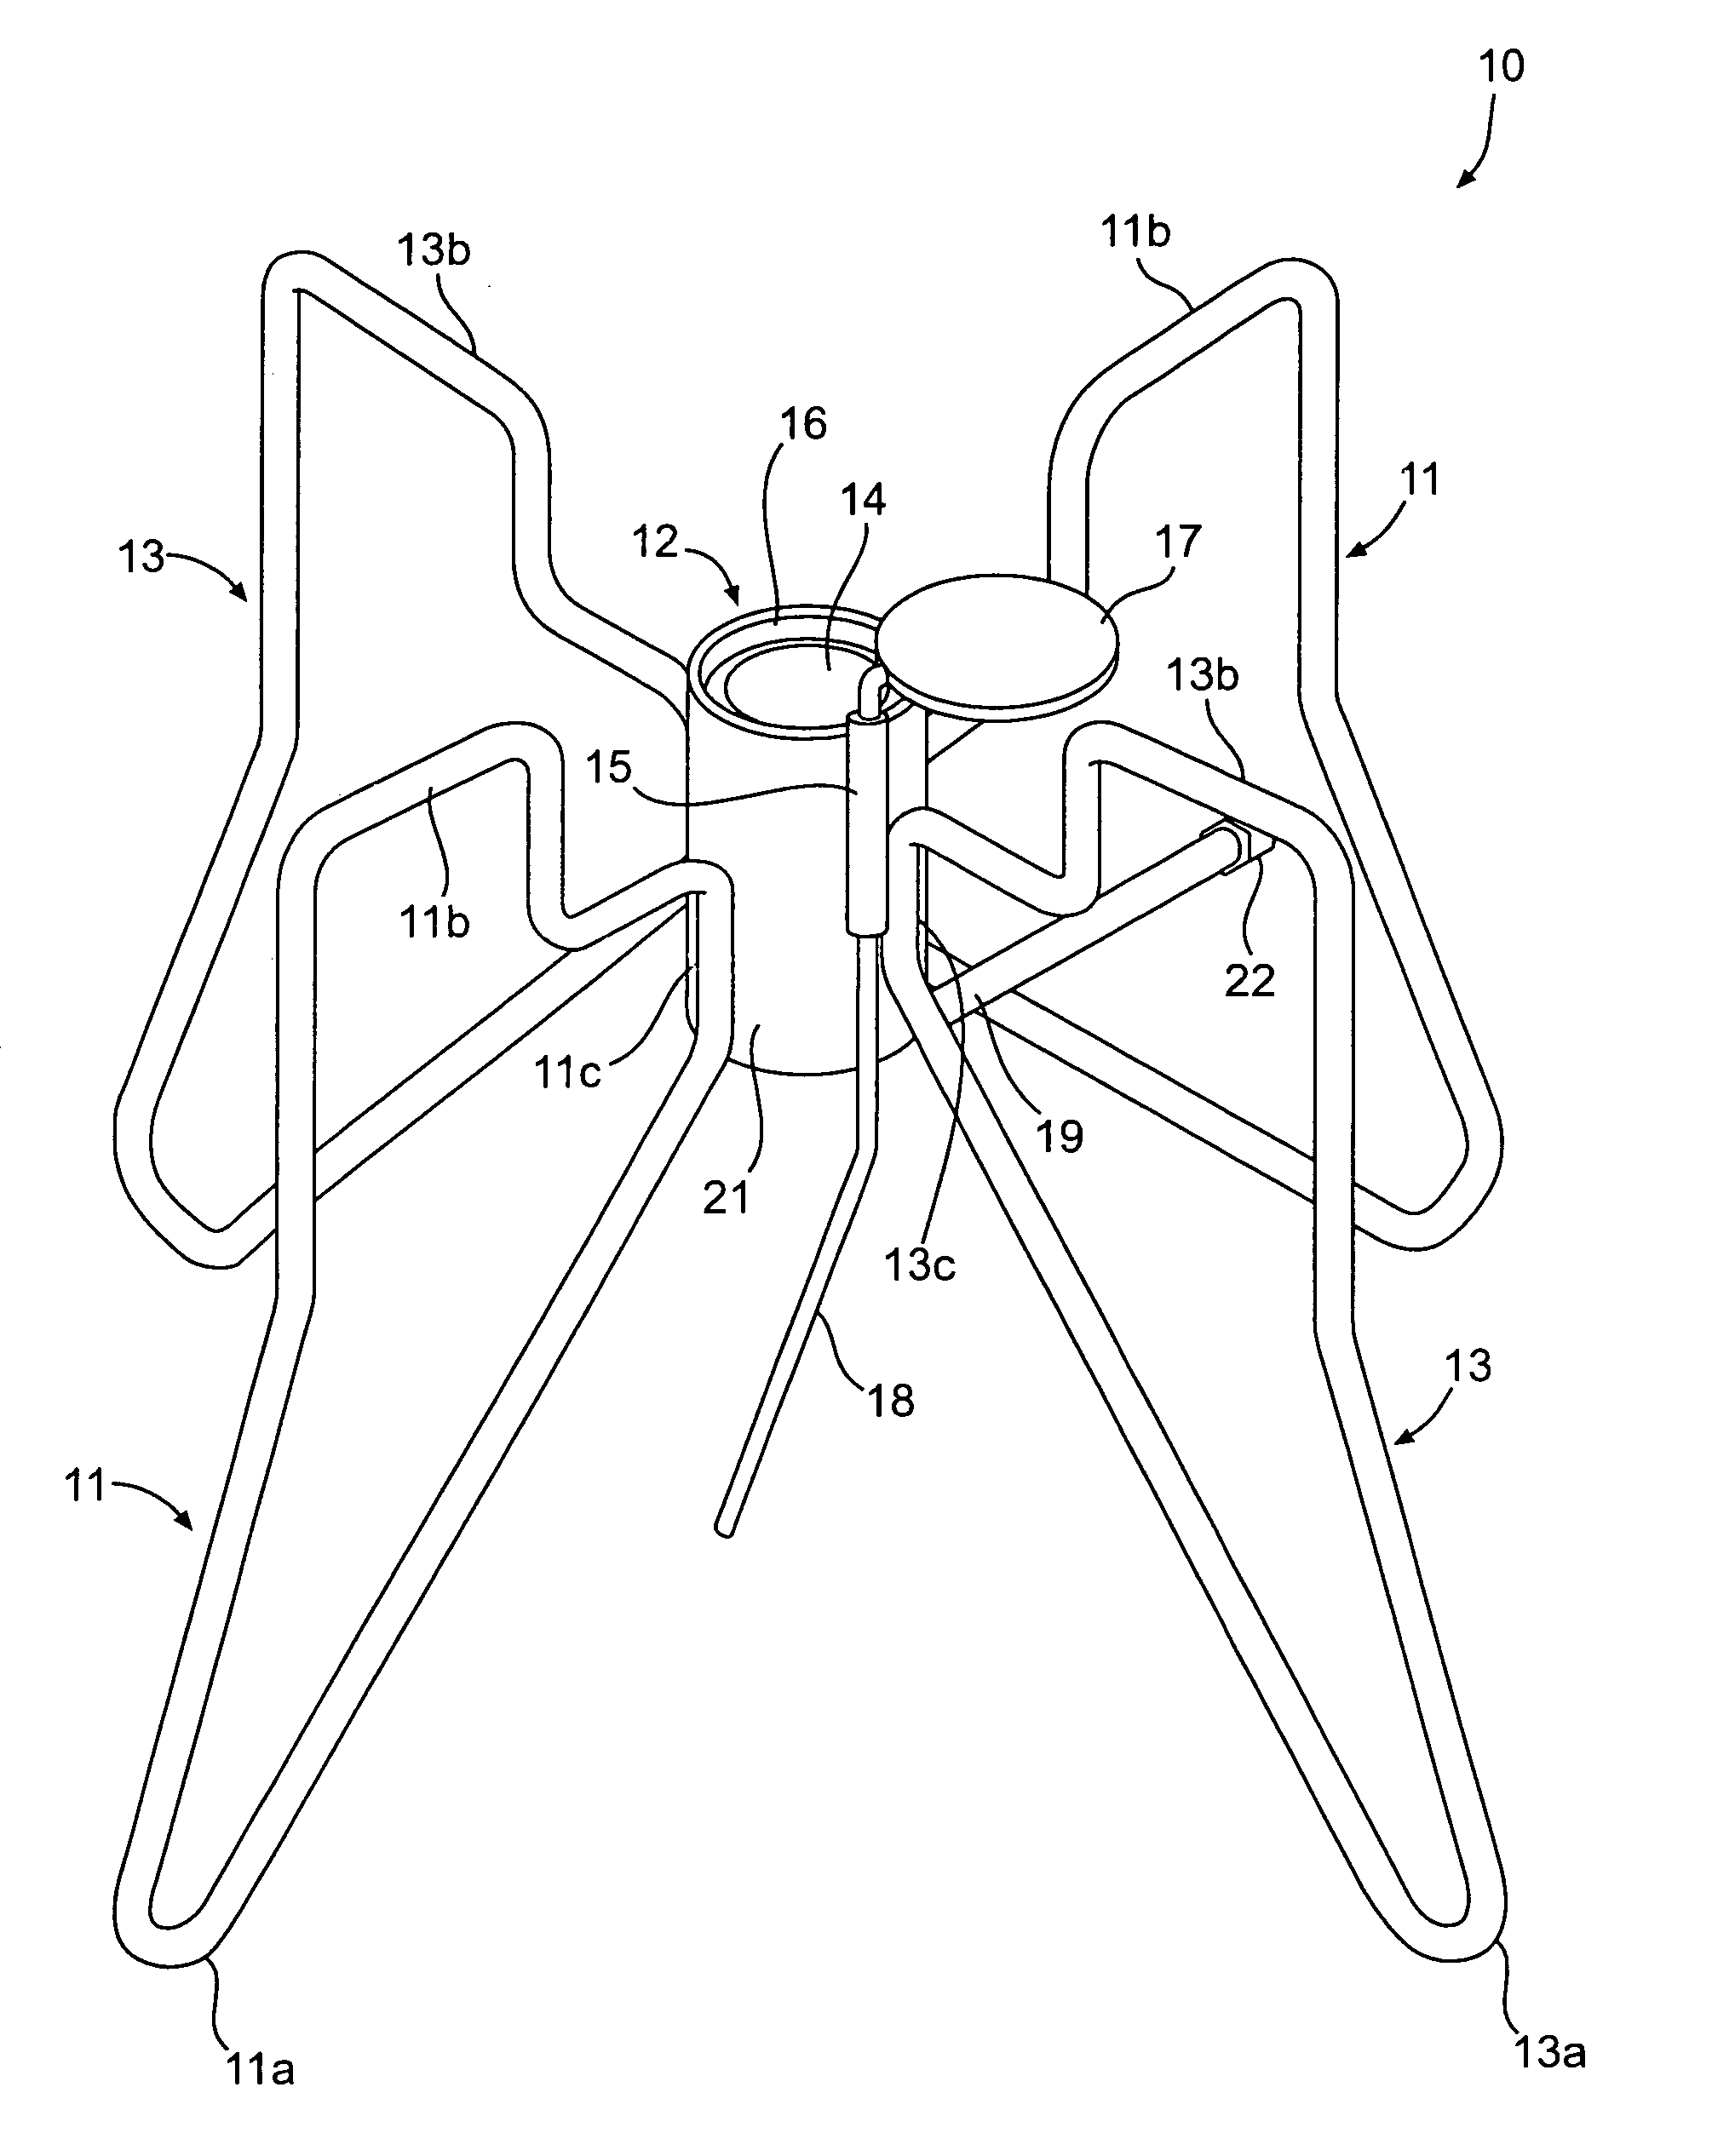 Stand assembly for supporting free-standing objects